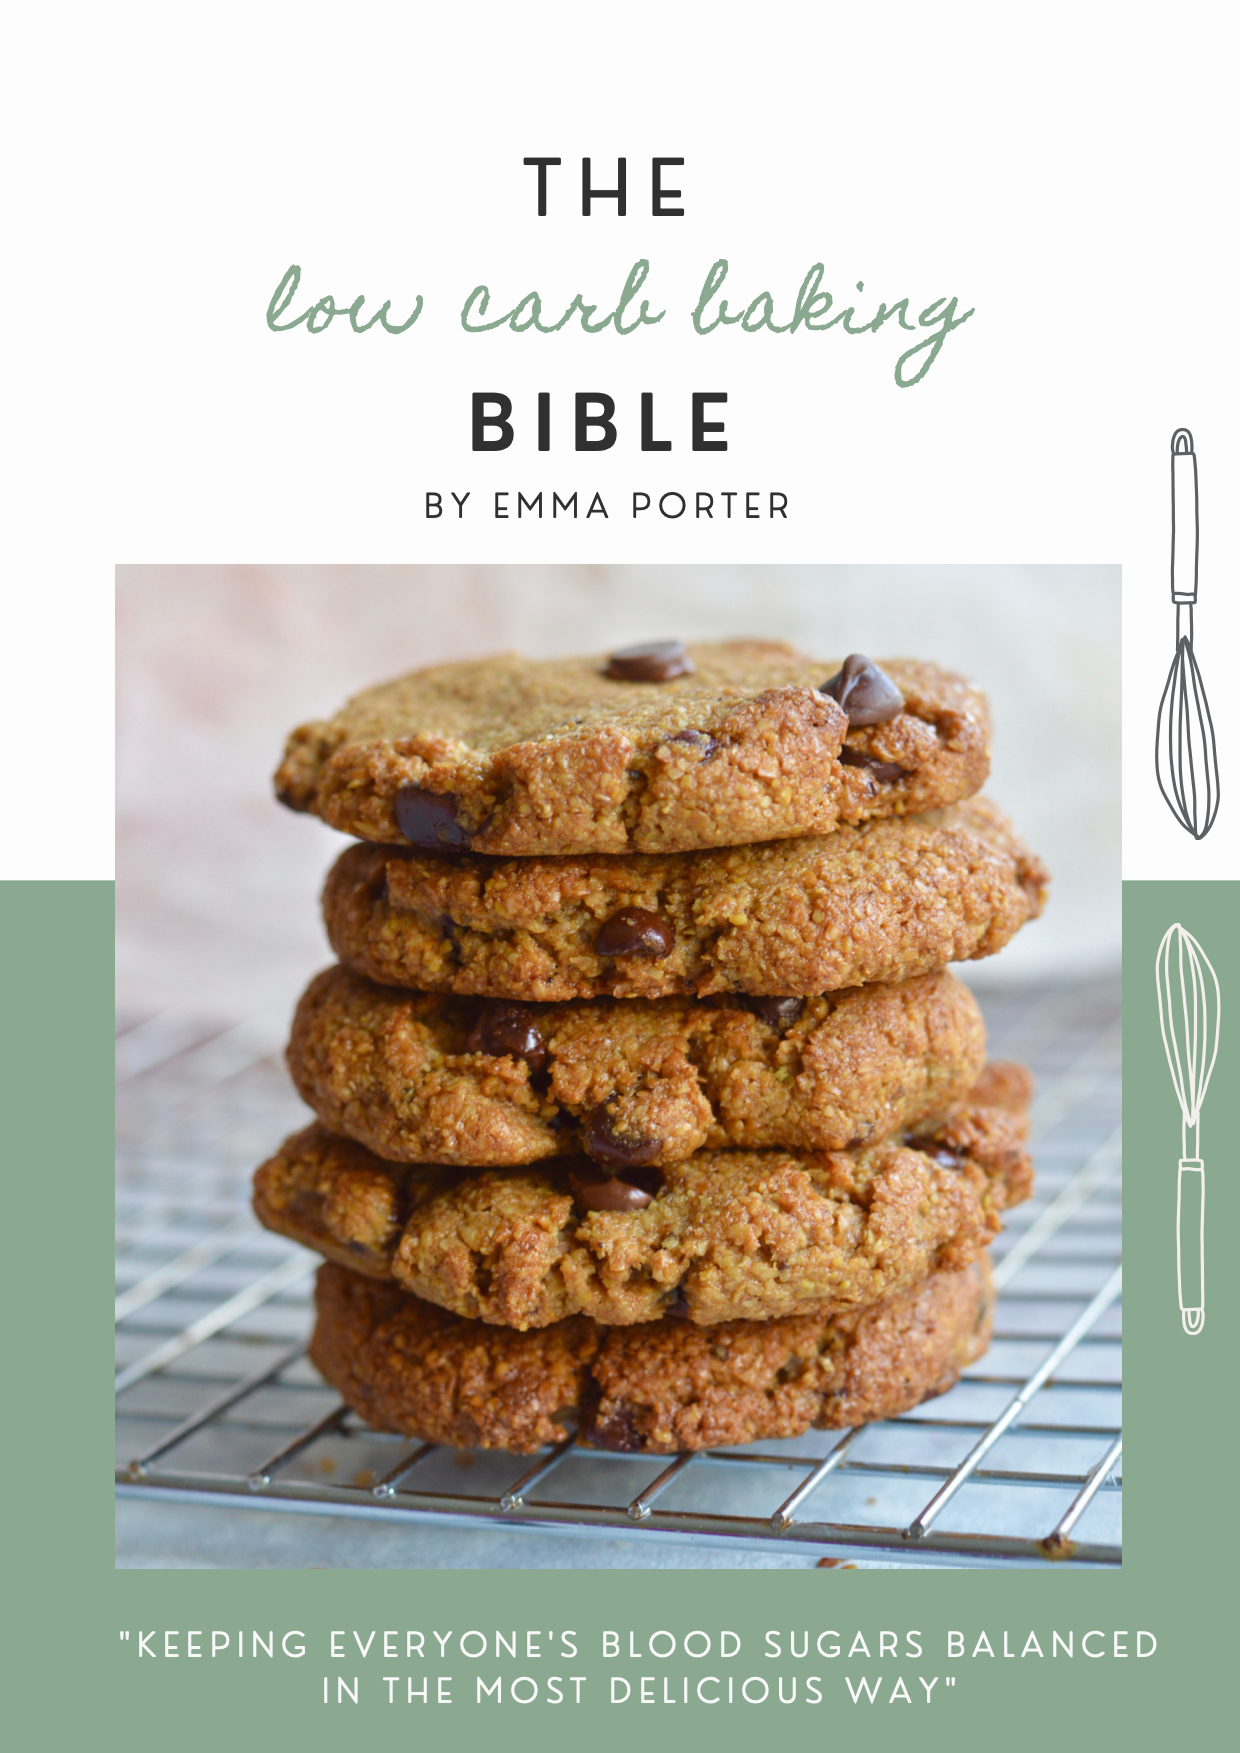 The Low Carb Baking Bible – OUT NOW